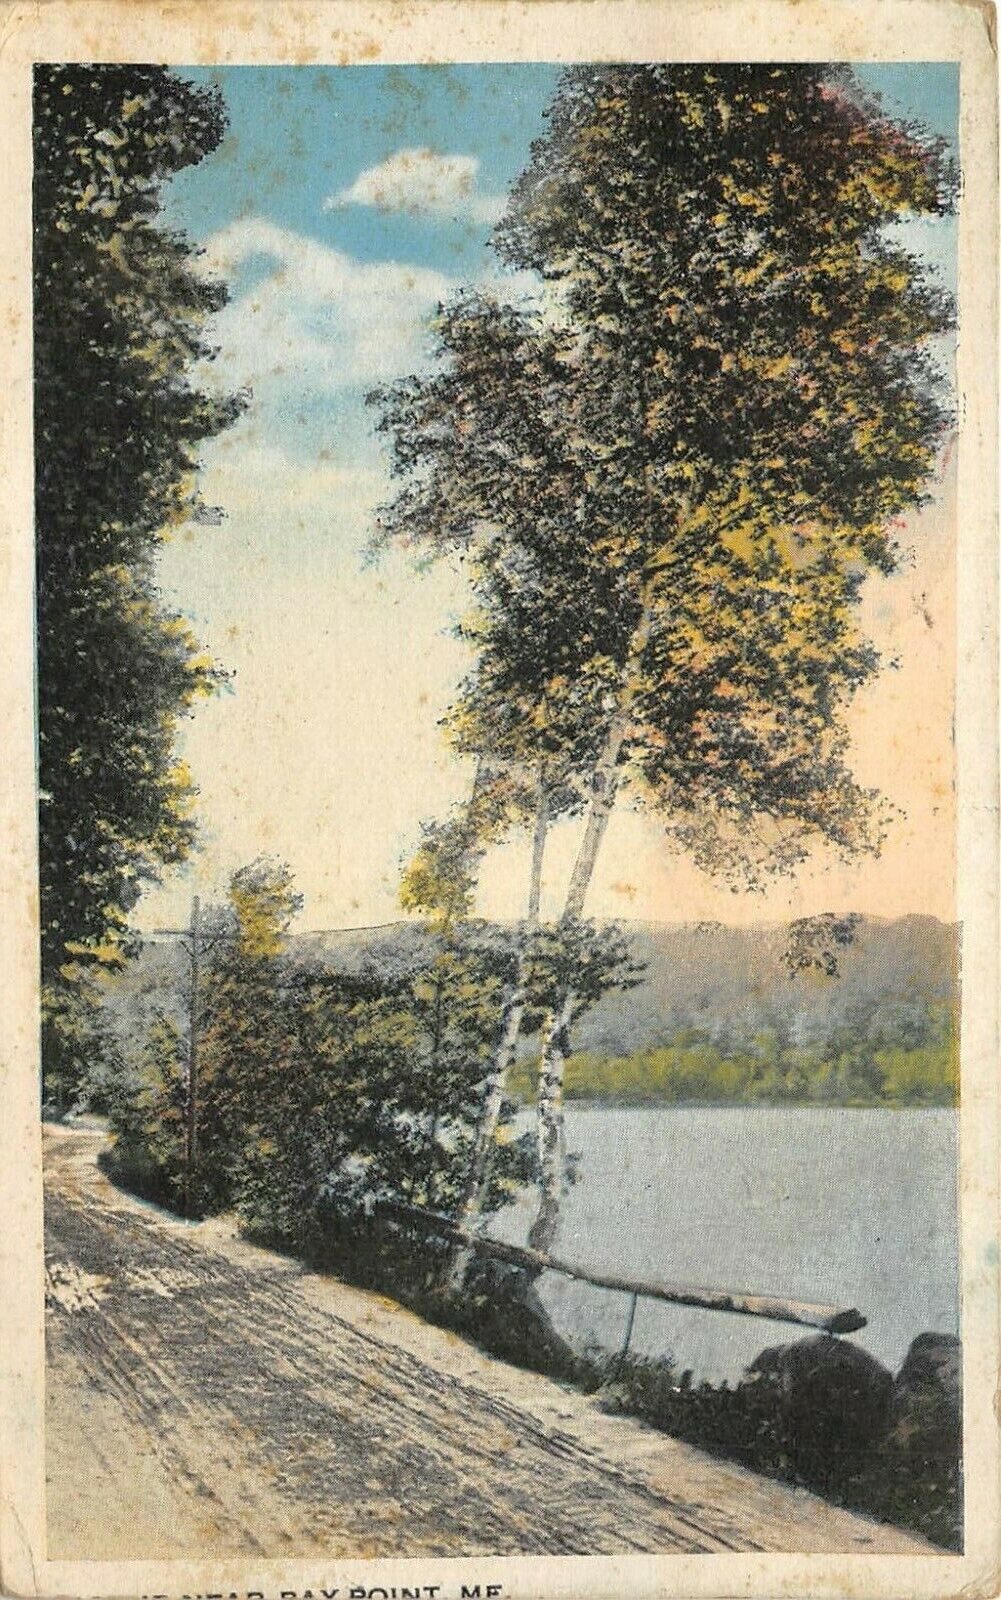 Bay Point Maine 1921 Greetings Postcard Dirt Road by Lake